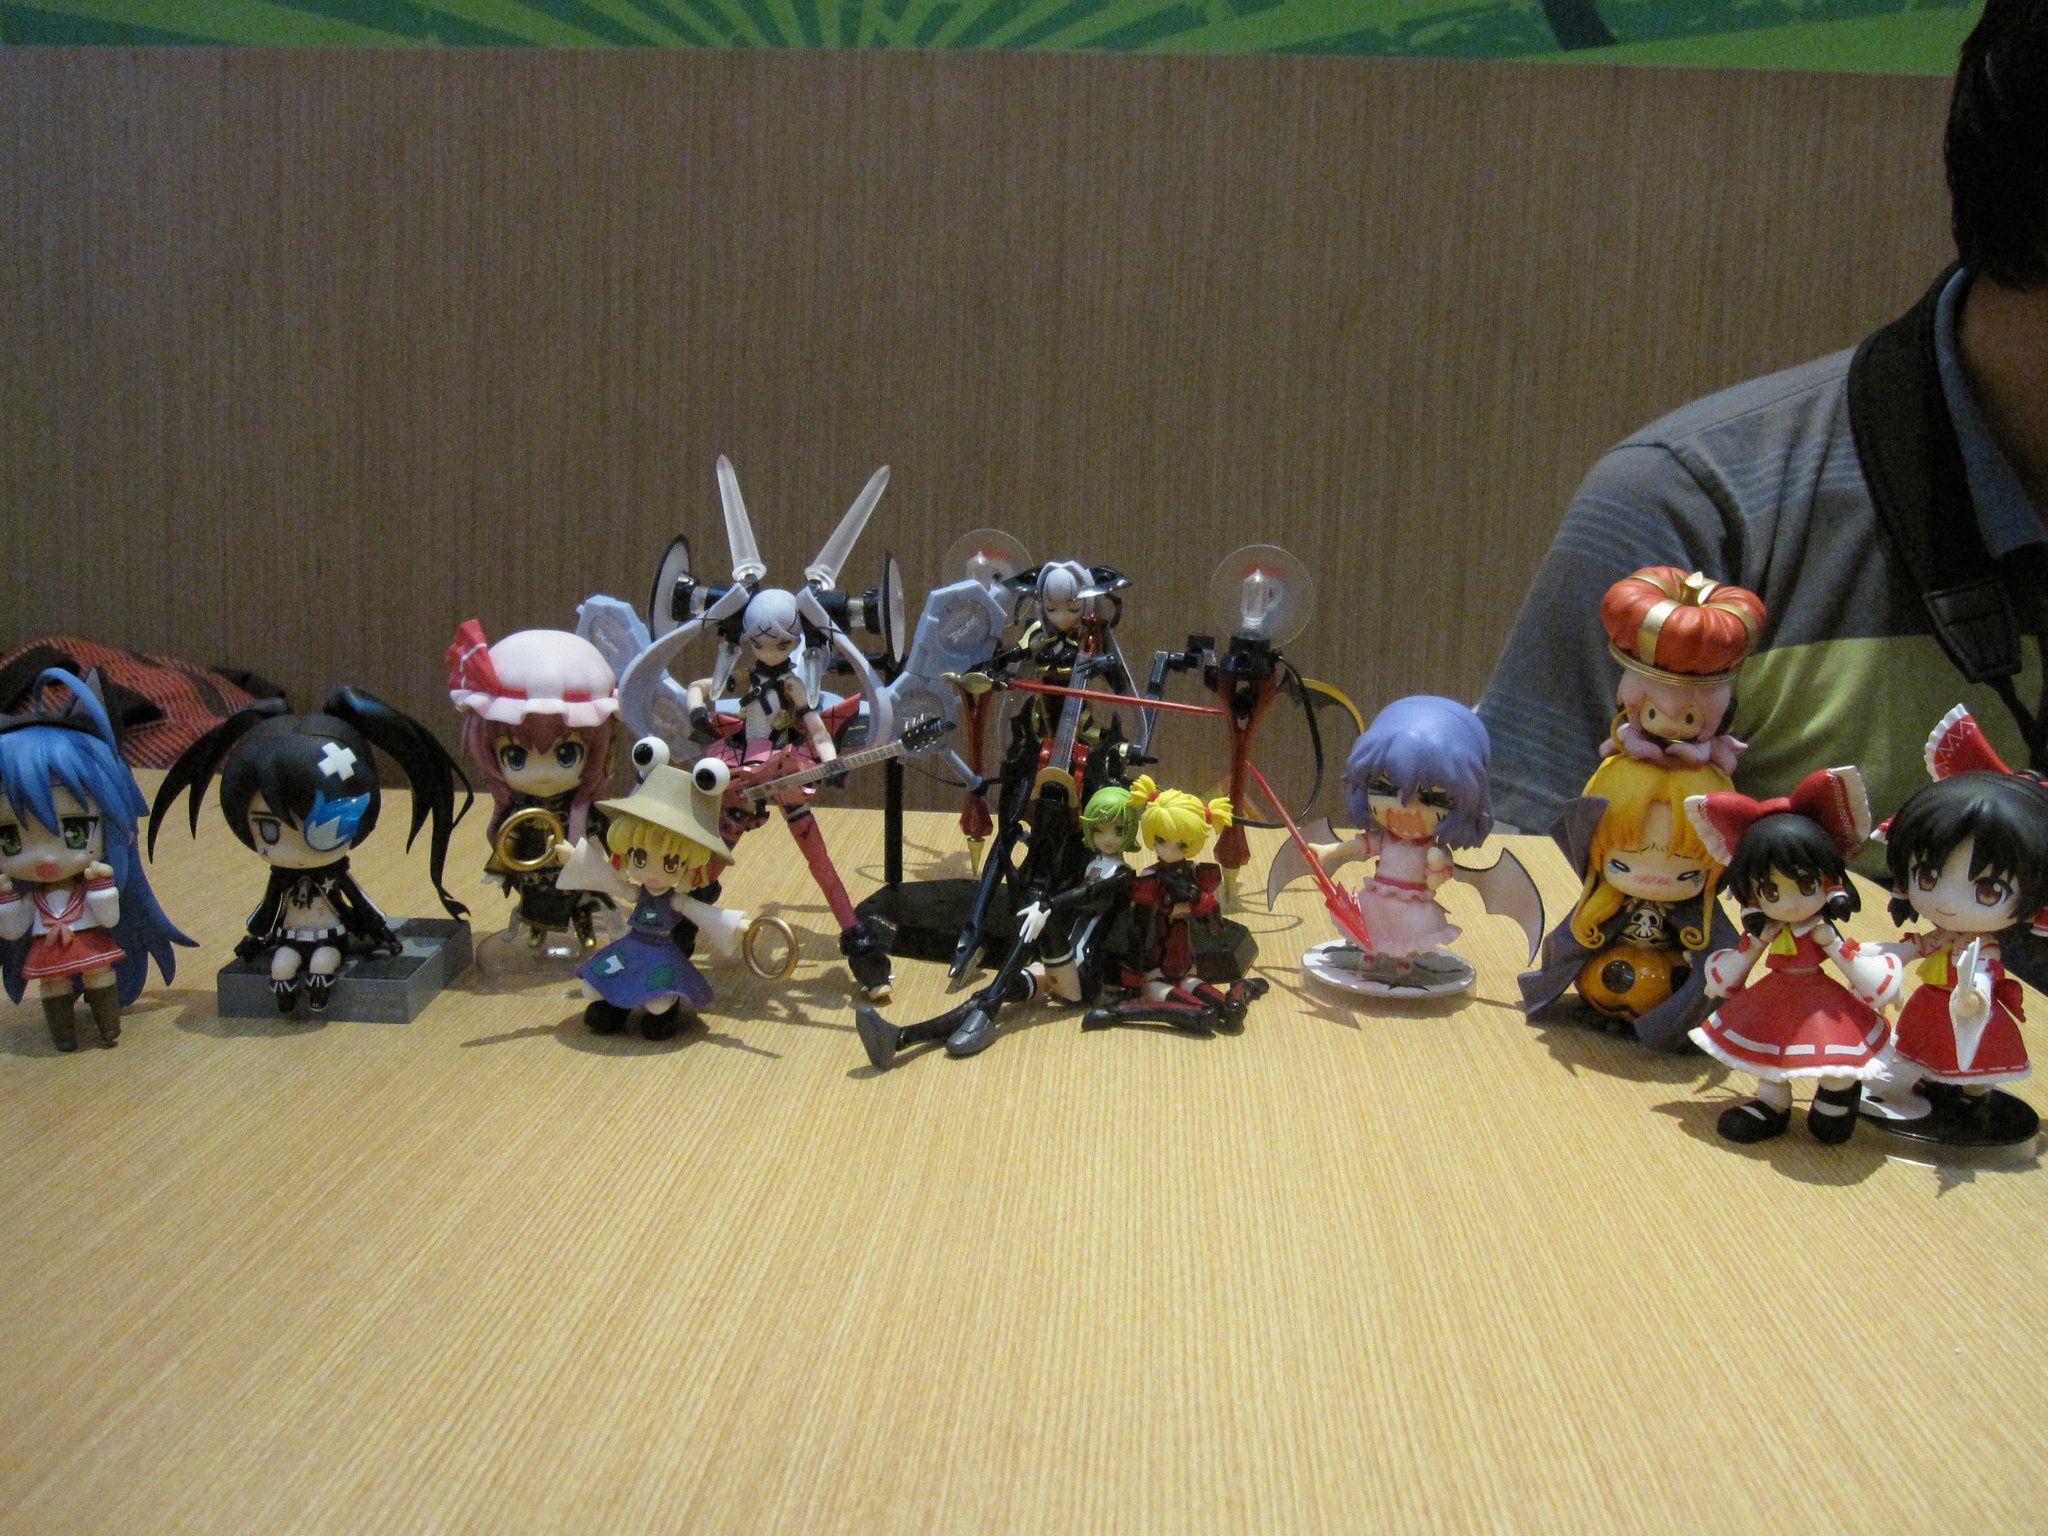 many different items from anime are displayed on a table